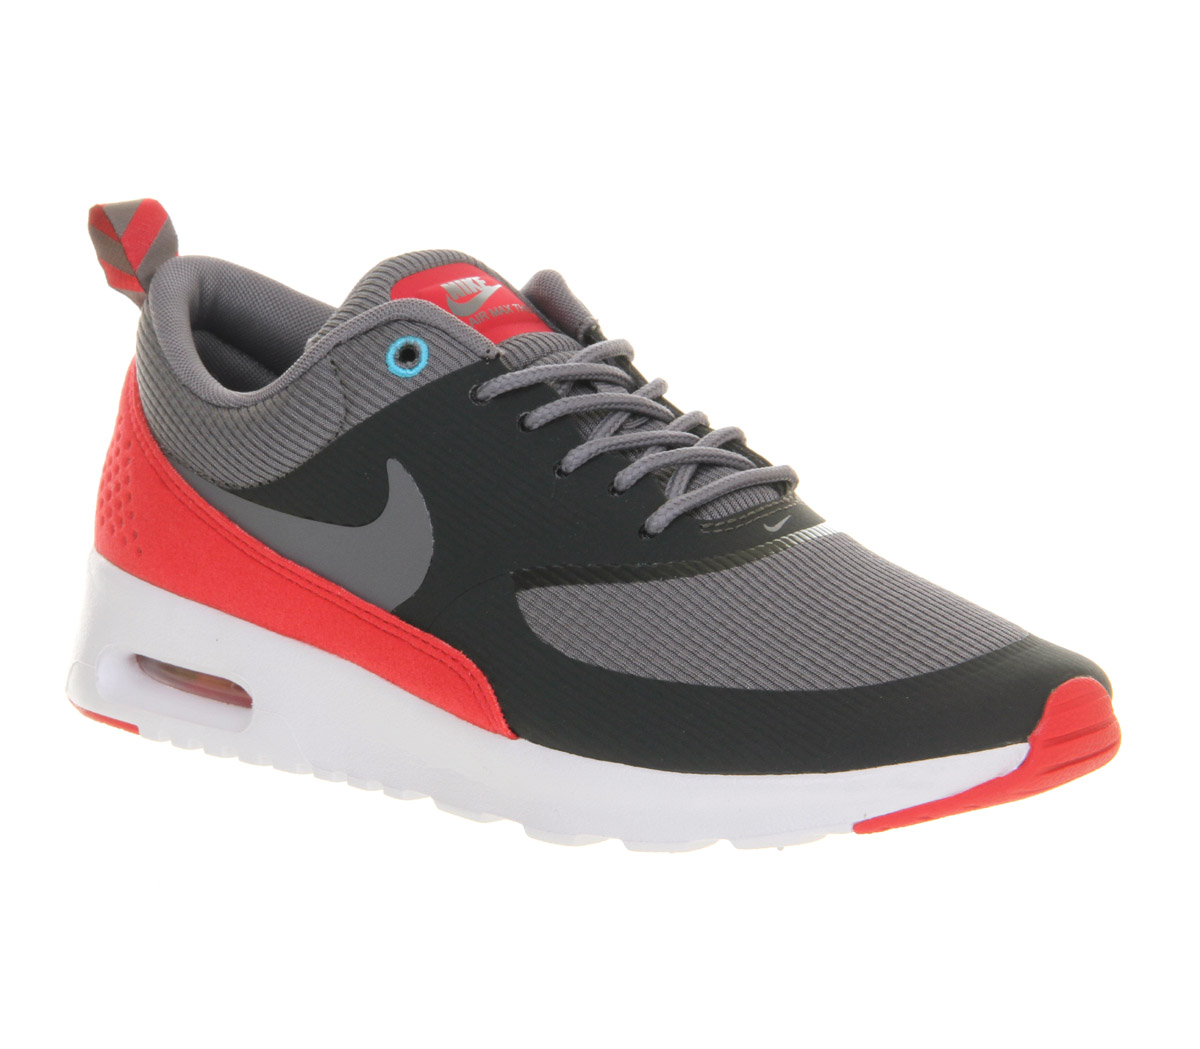 NikeAir Max TheaAnthracite Grey Legend Red